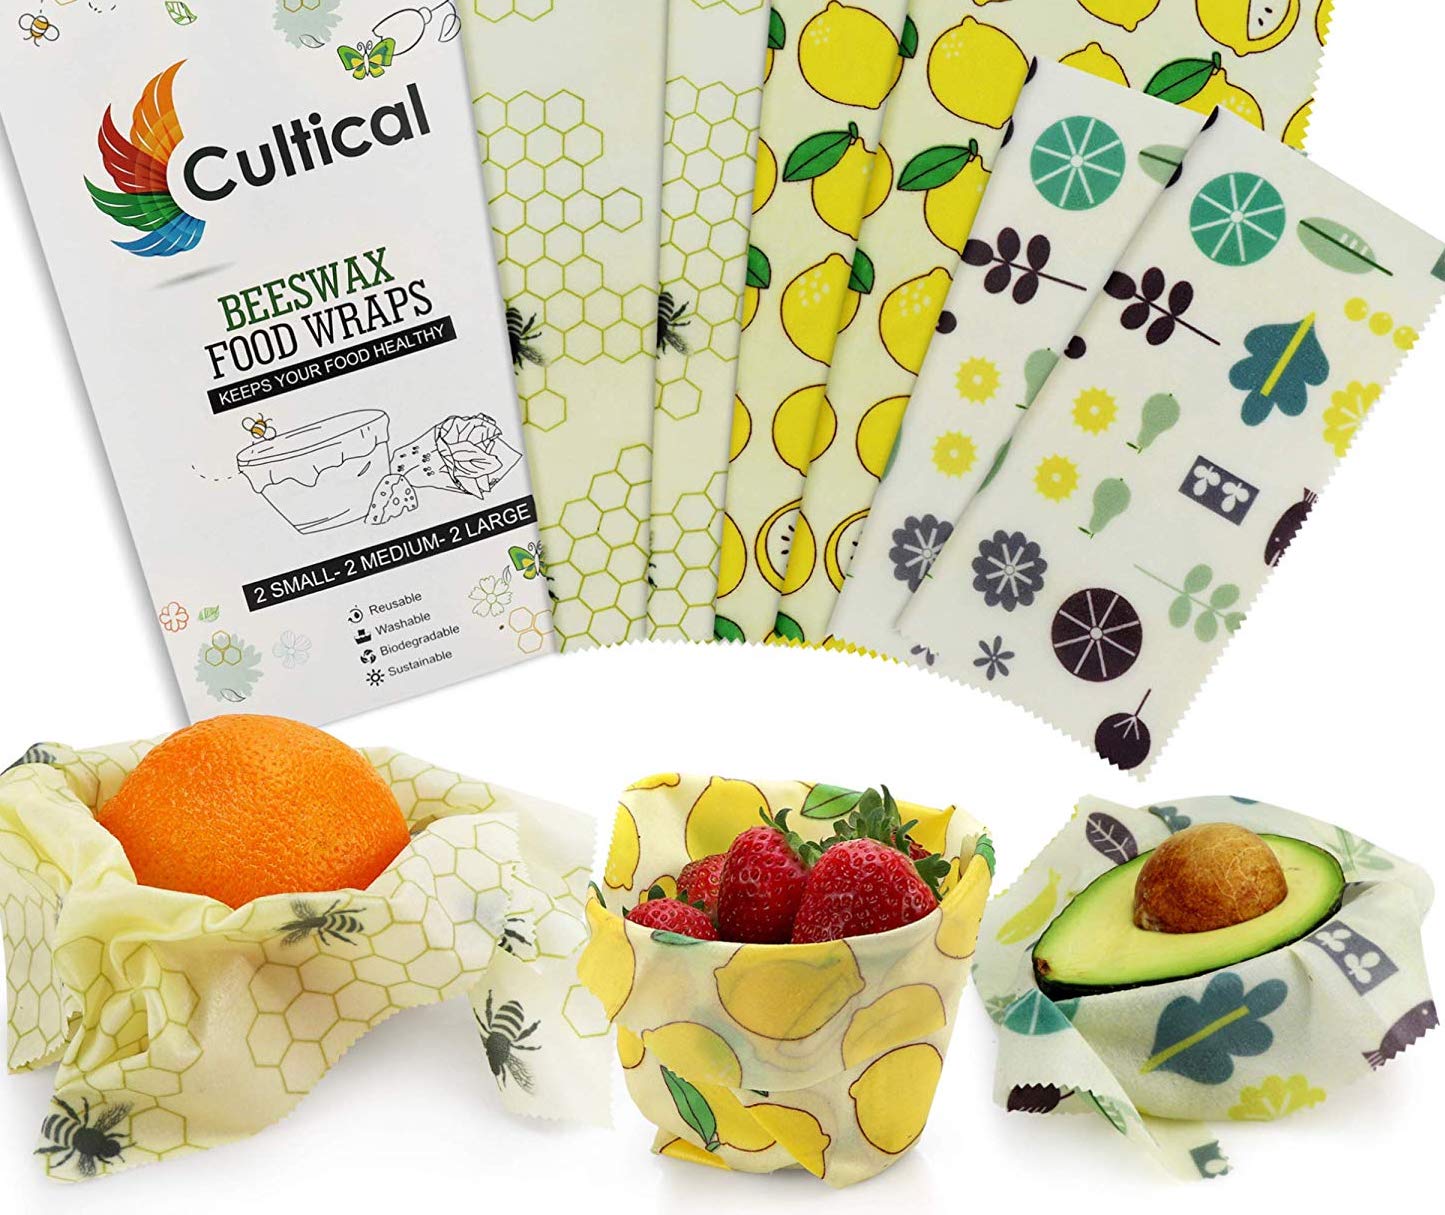 Cultical + Beeswax Food Wrap 6-Pack